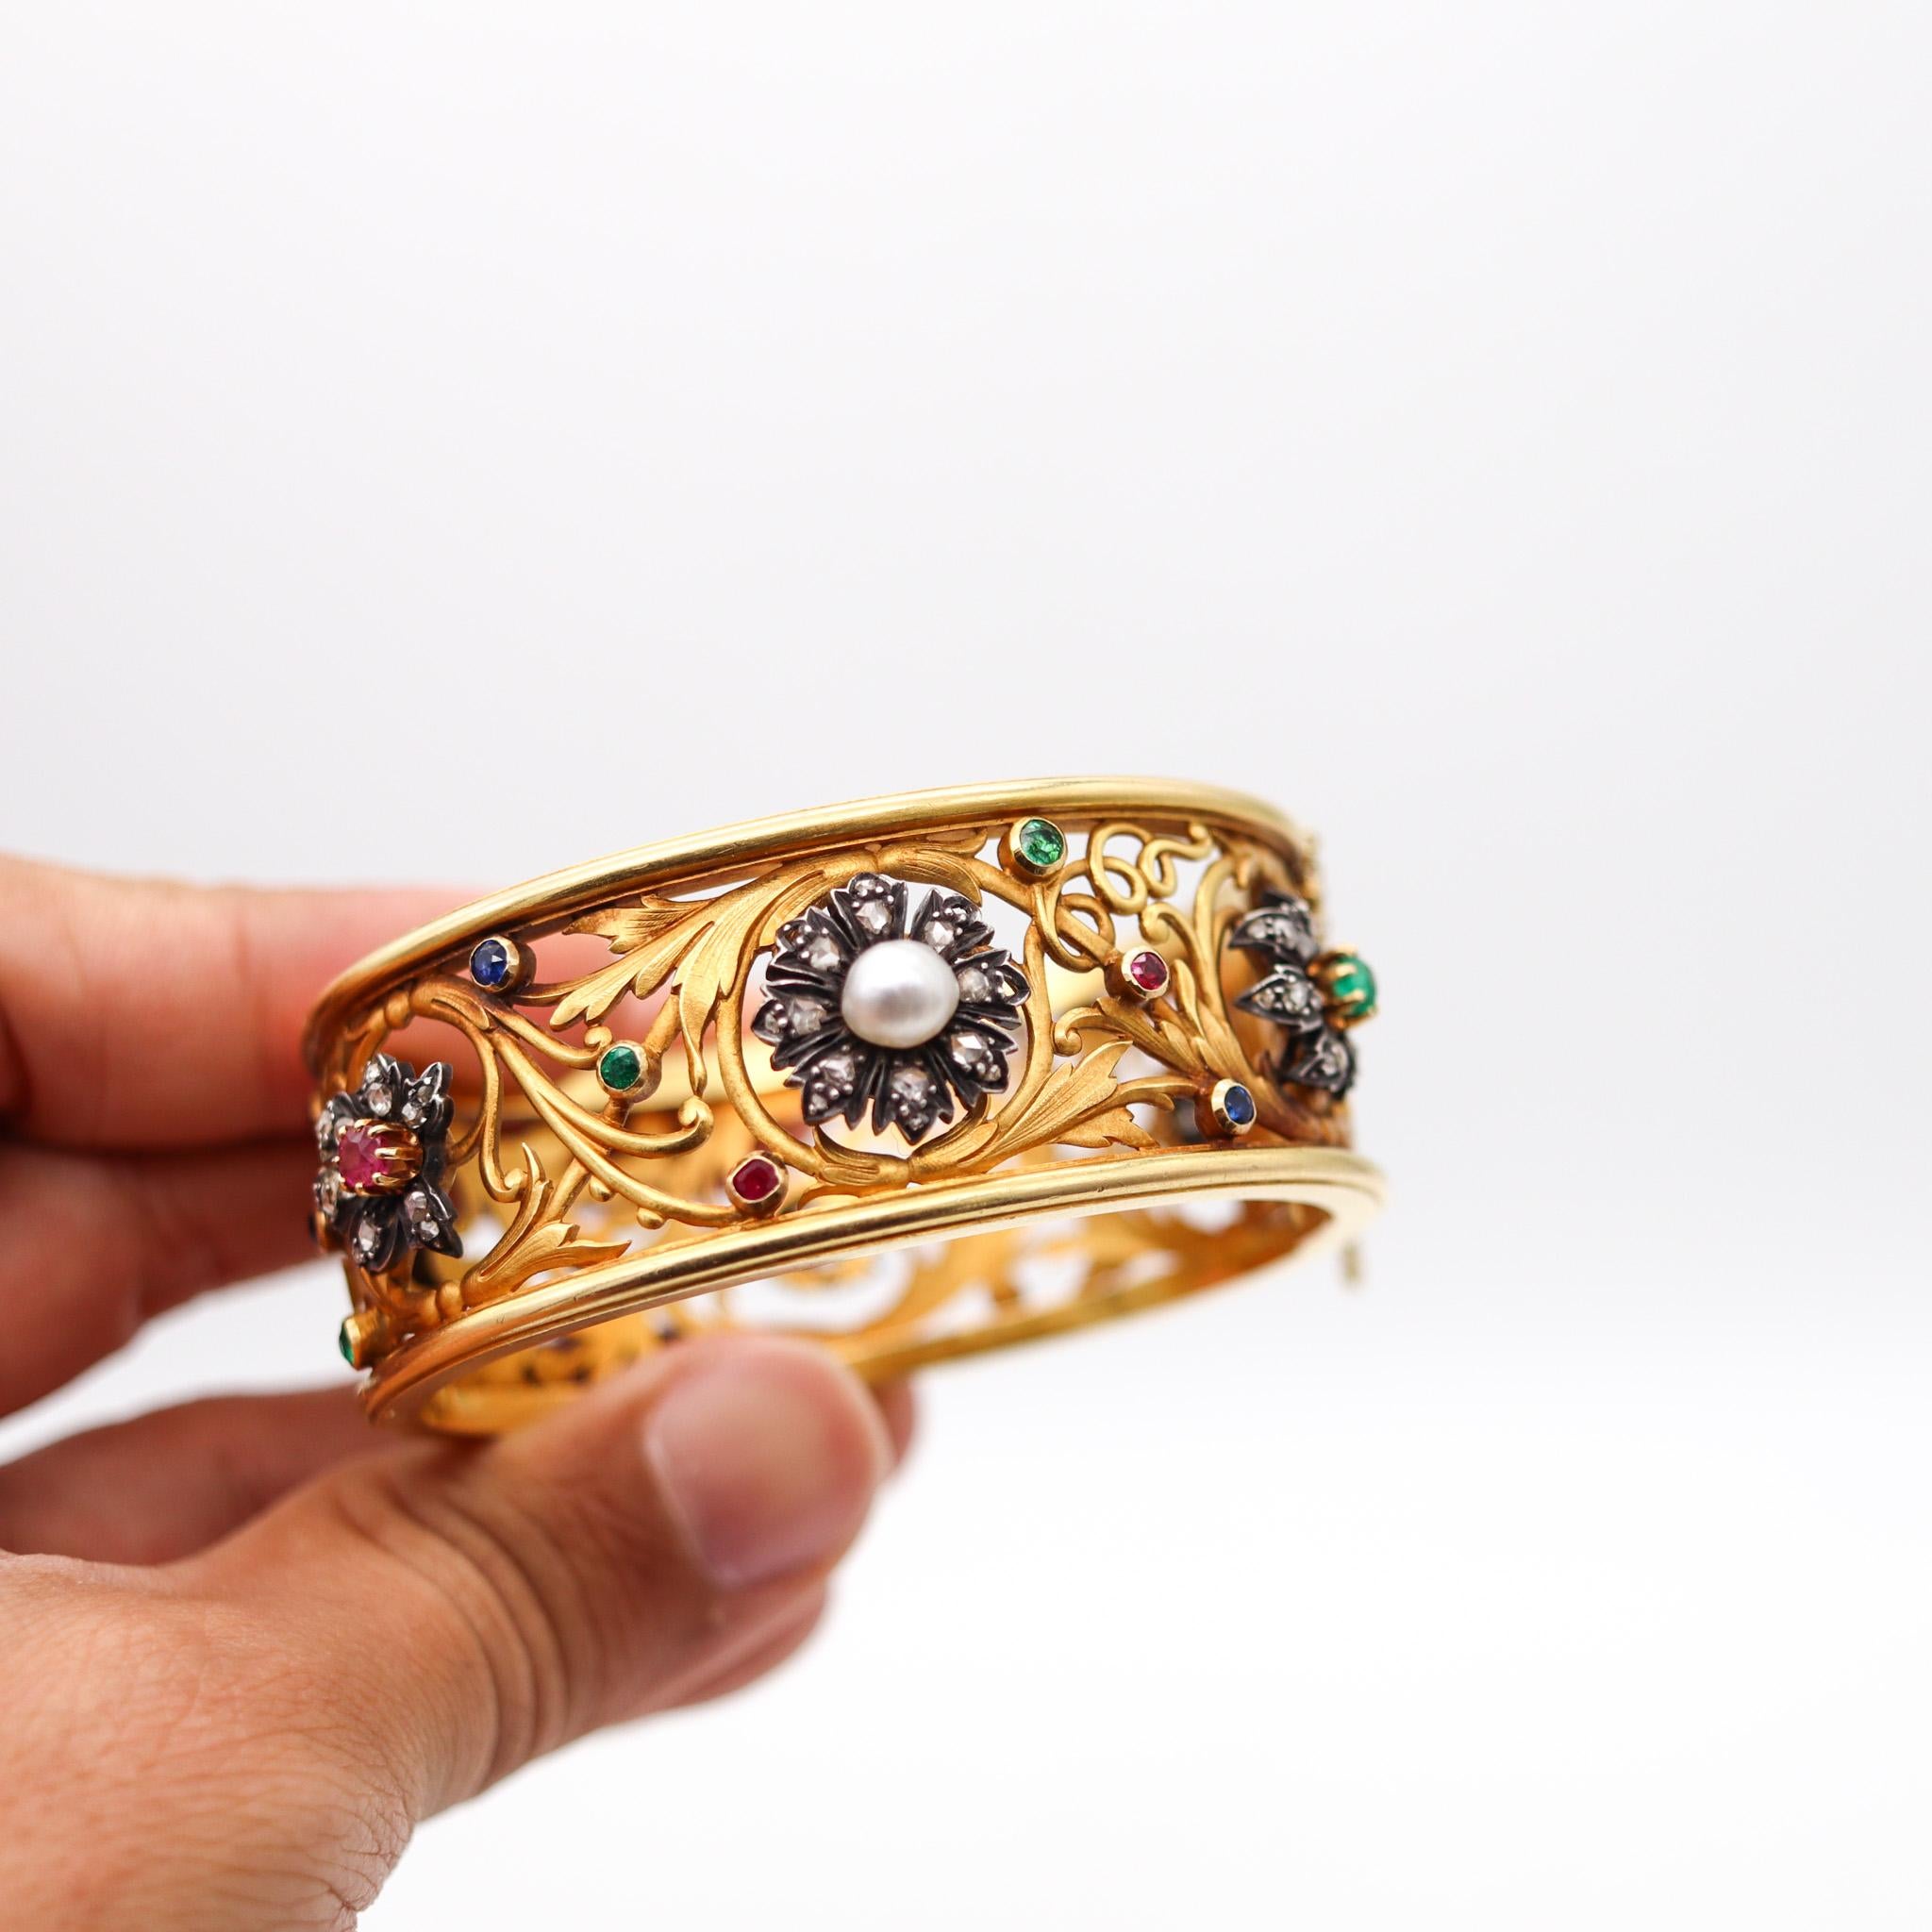 French 1890 Art Nouveau Bangle Bracelet In 18Kt Yellow Gold With Gemstones For Sale 1